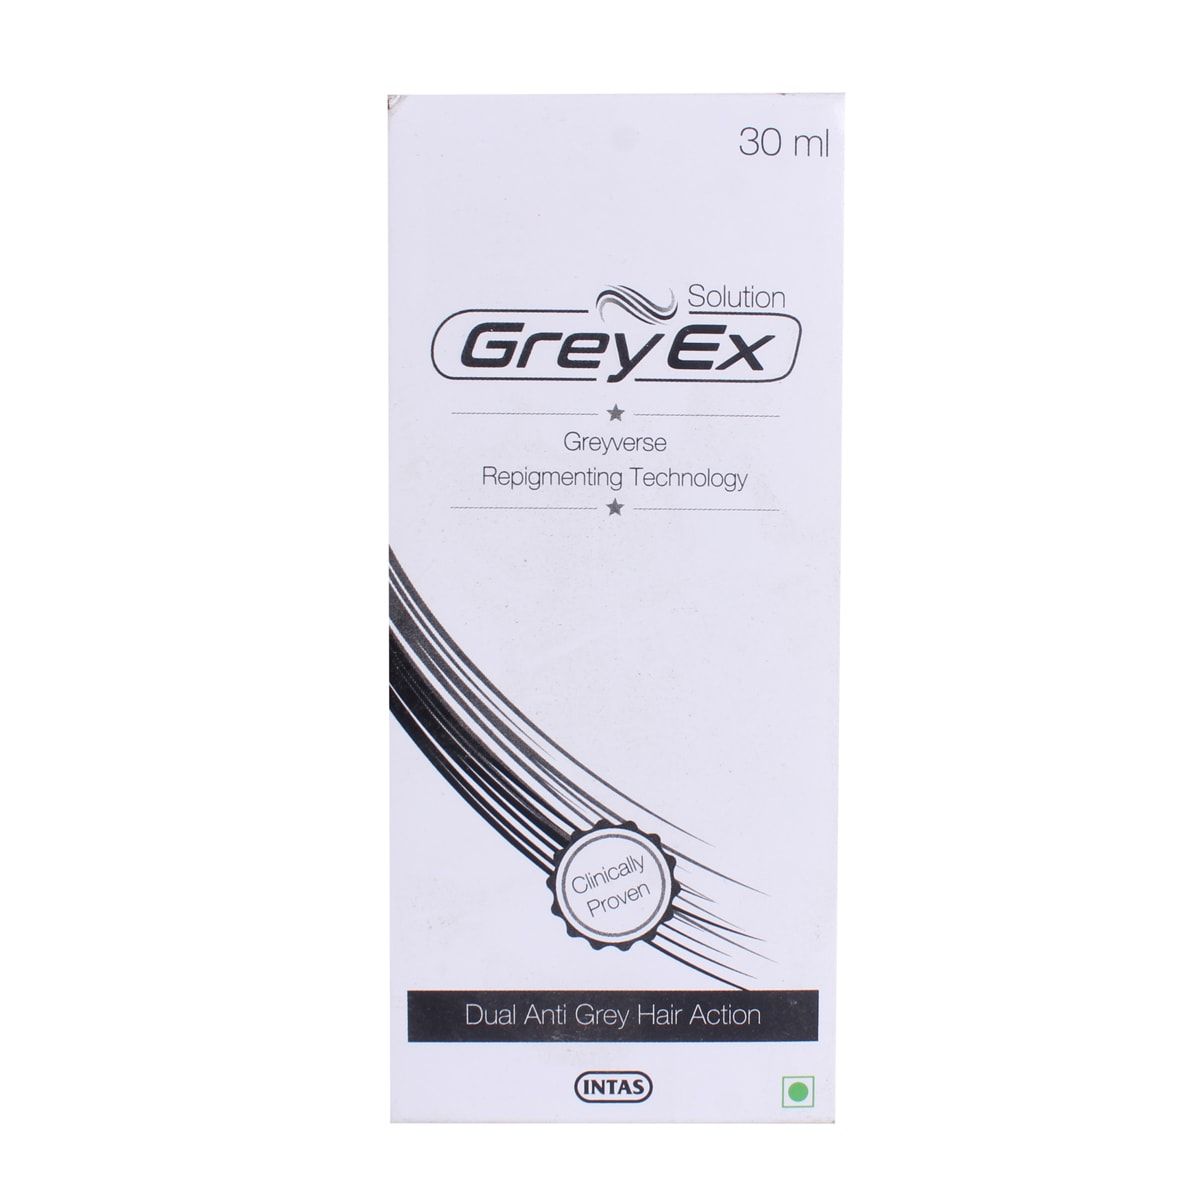 Greyex Solution 30 ml Price, Uses, Side Effects, Composition - Apollo  Pharmacy